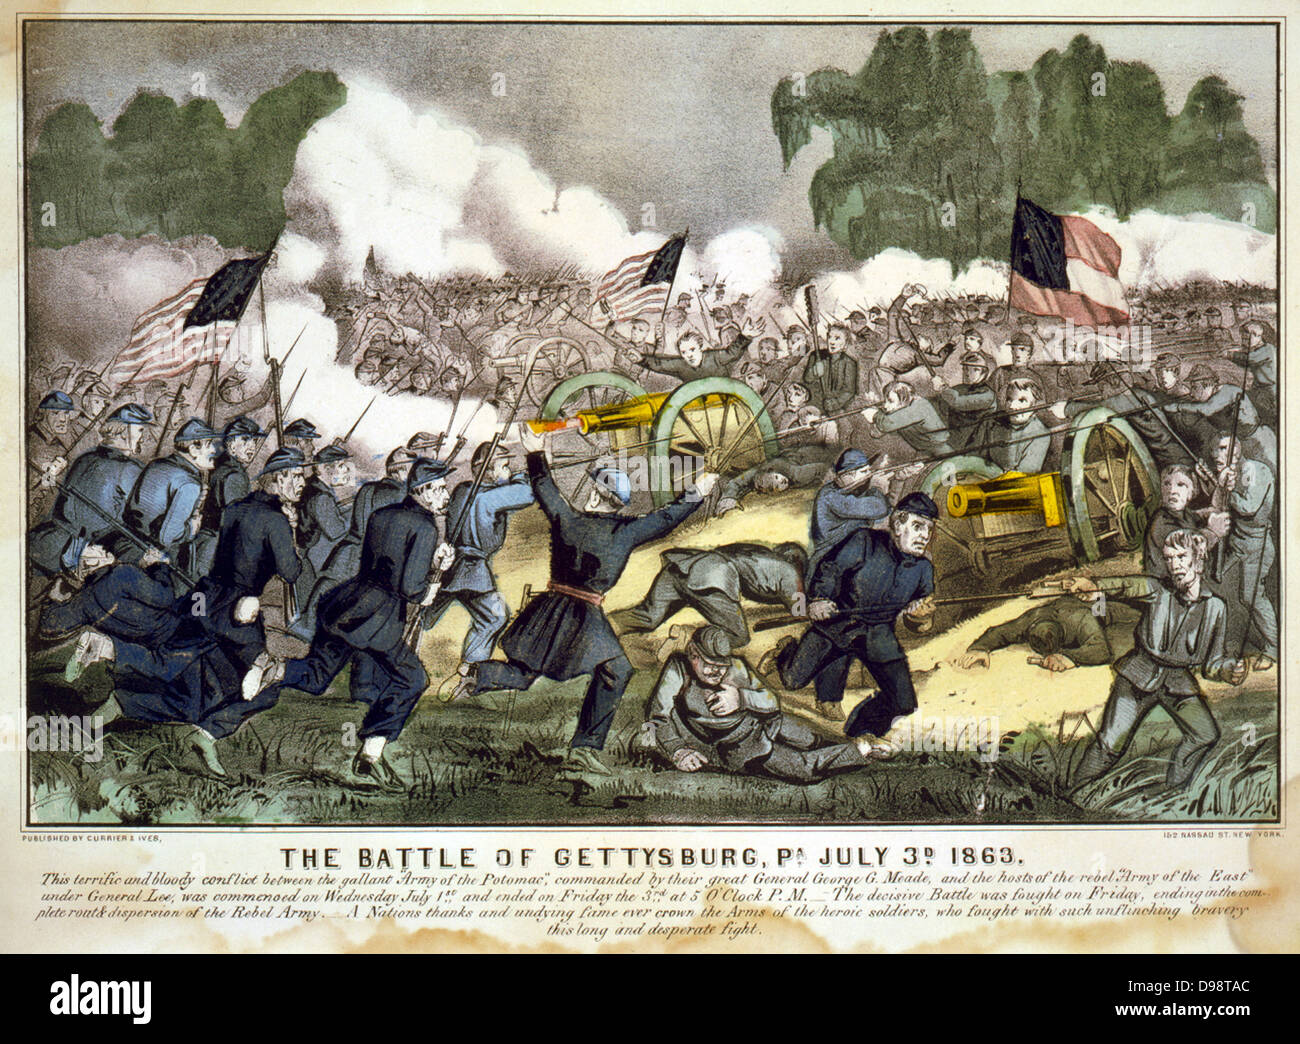 American Civil War 1861-1865: Battle of Gettysburg 1-3 July 1863 which  ended Lee's invasion of the North. Union troops, bayonets fixed, charging  Confederate guns. Heaviest casualties than in any other in the